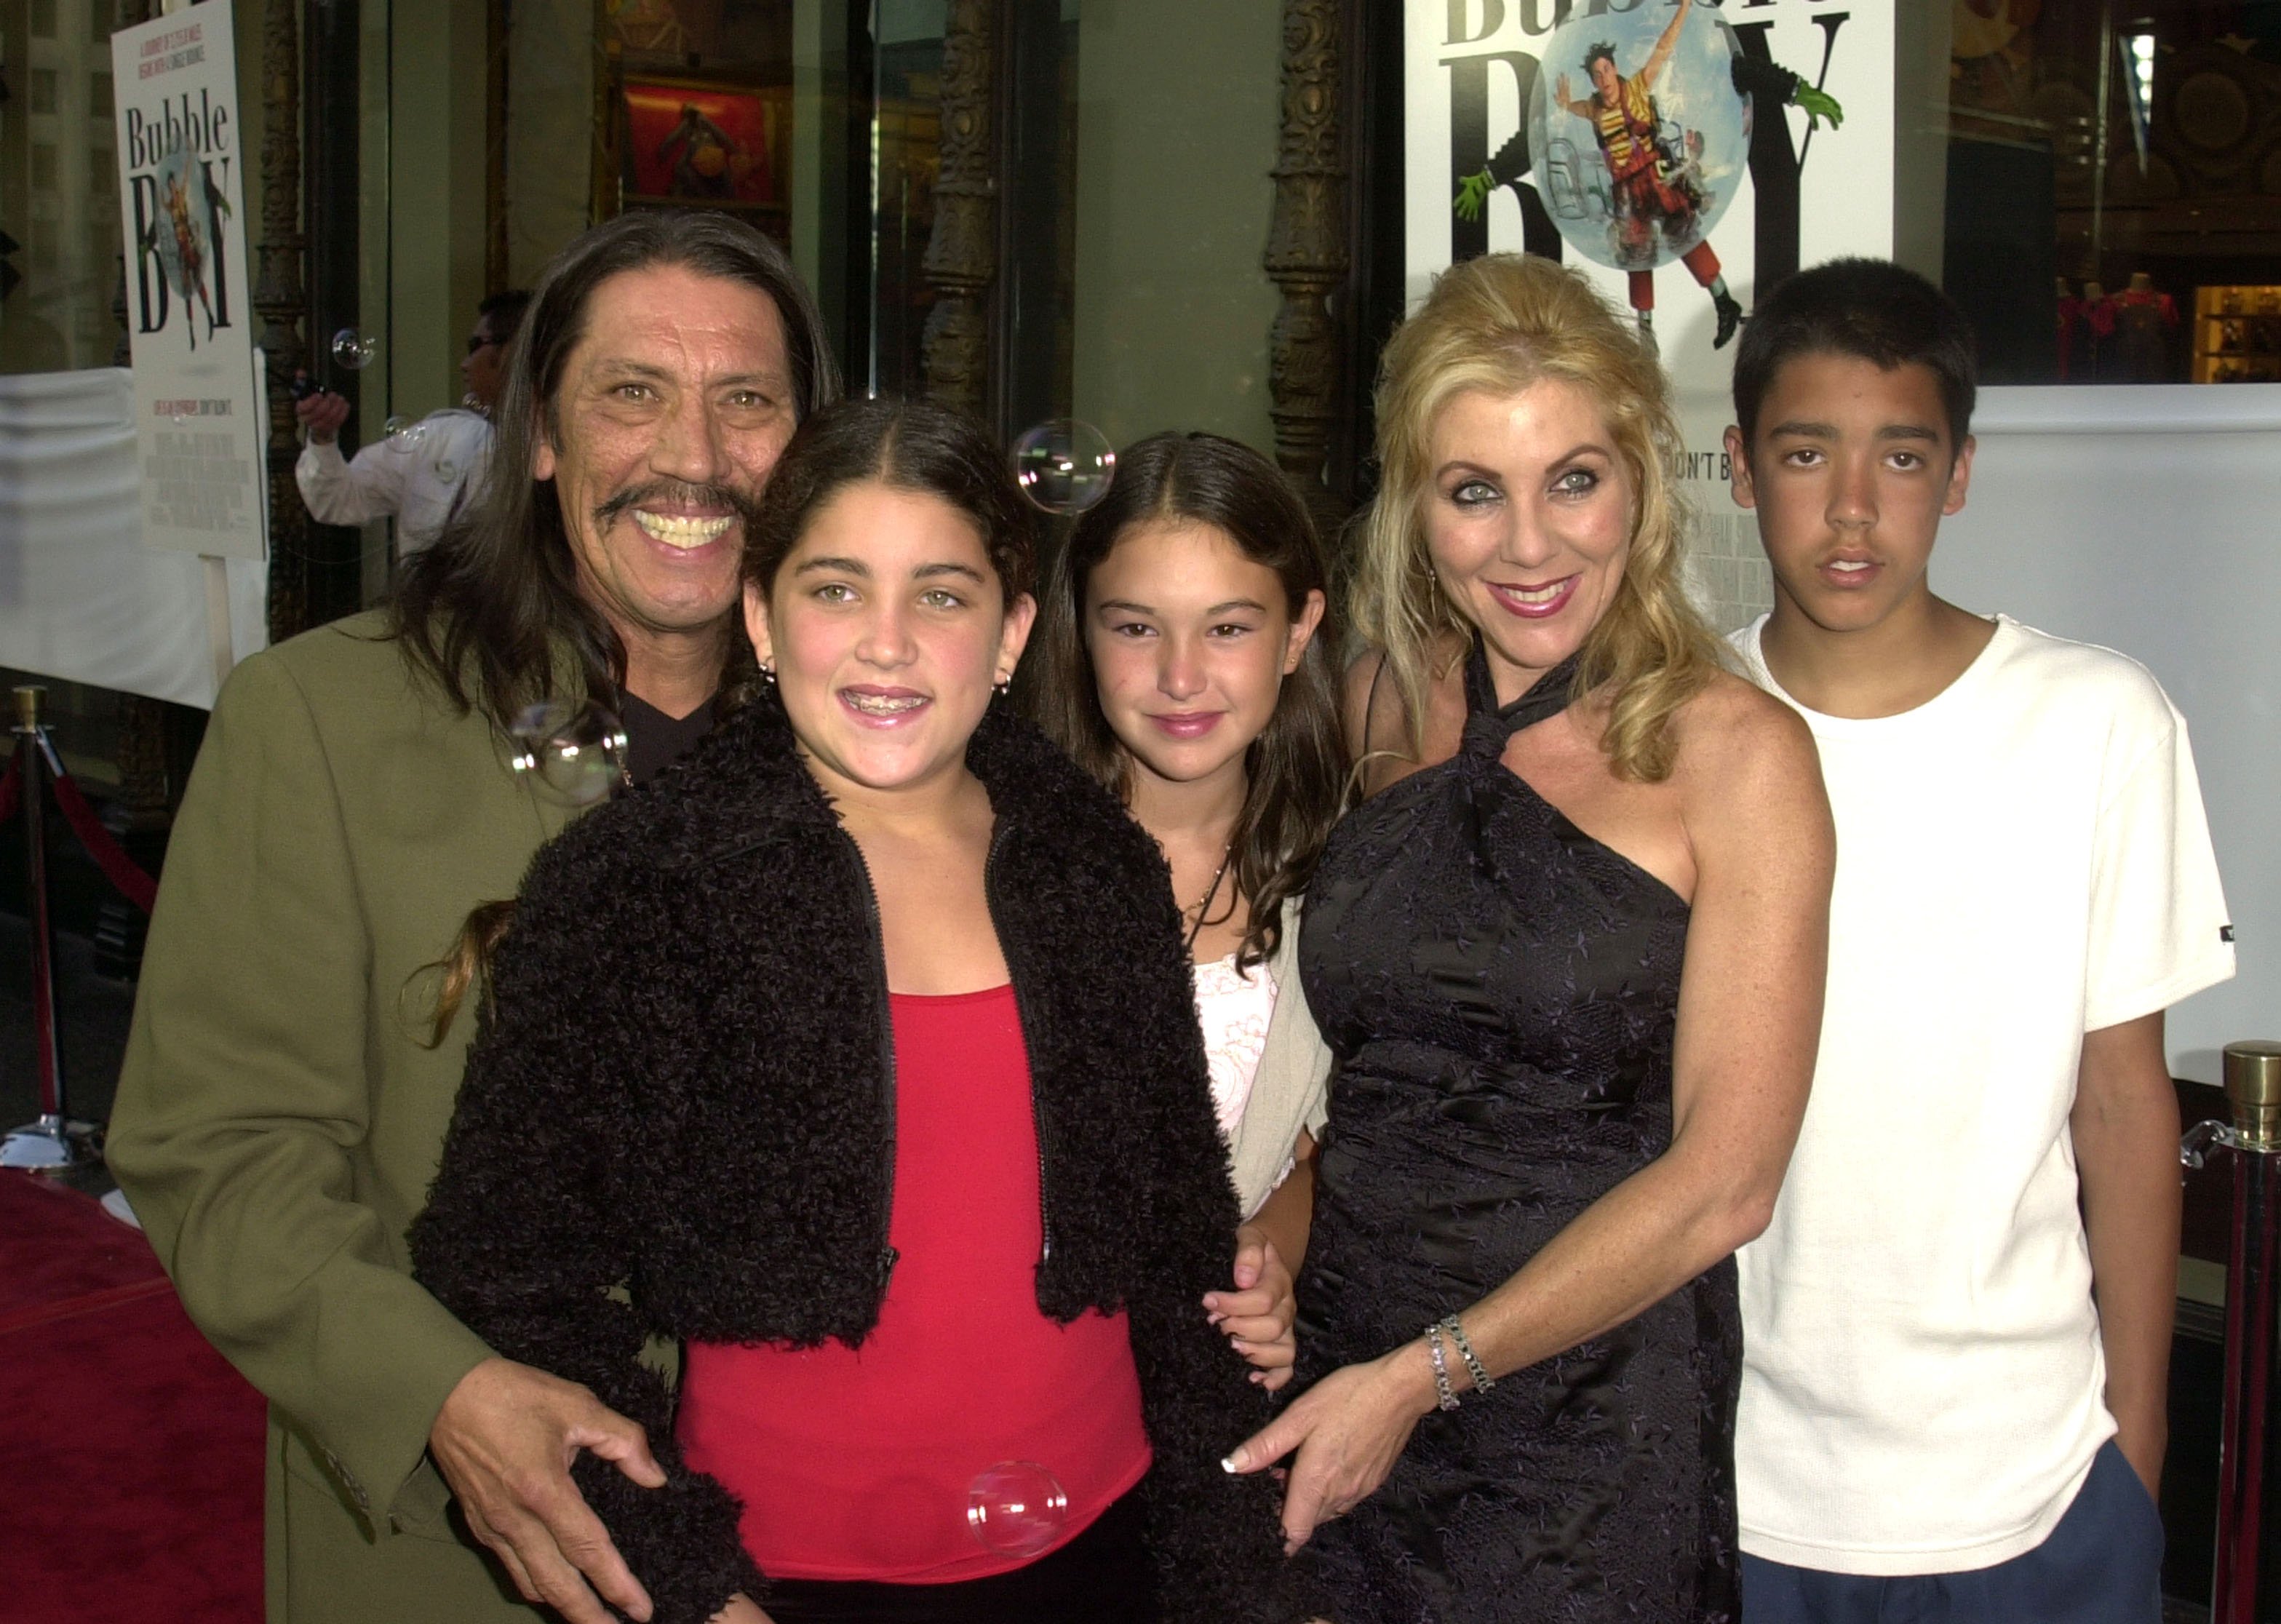 Danny Trejo, and his wife Debbie, together with their children Rebecca, Danielle, and Gilbert, attend the "Bubble Boy" premiere on August 23, 2001, in Hollywood, California. | Source: Getty Images